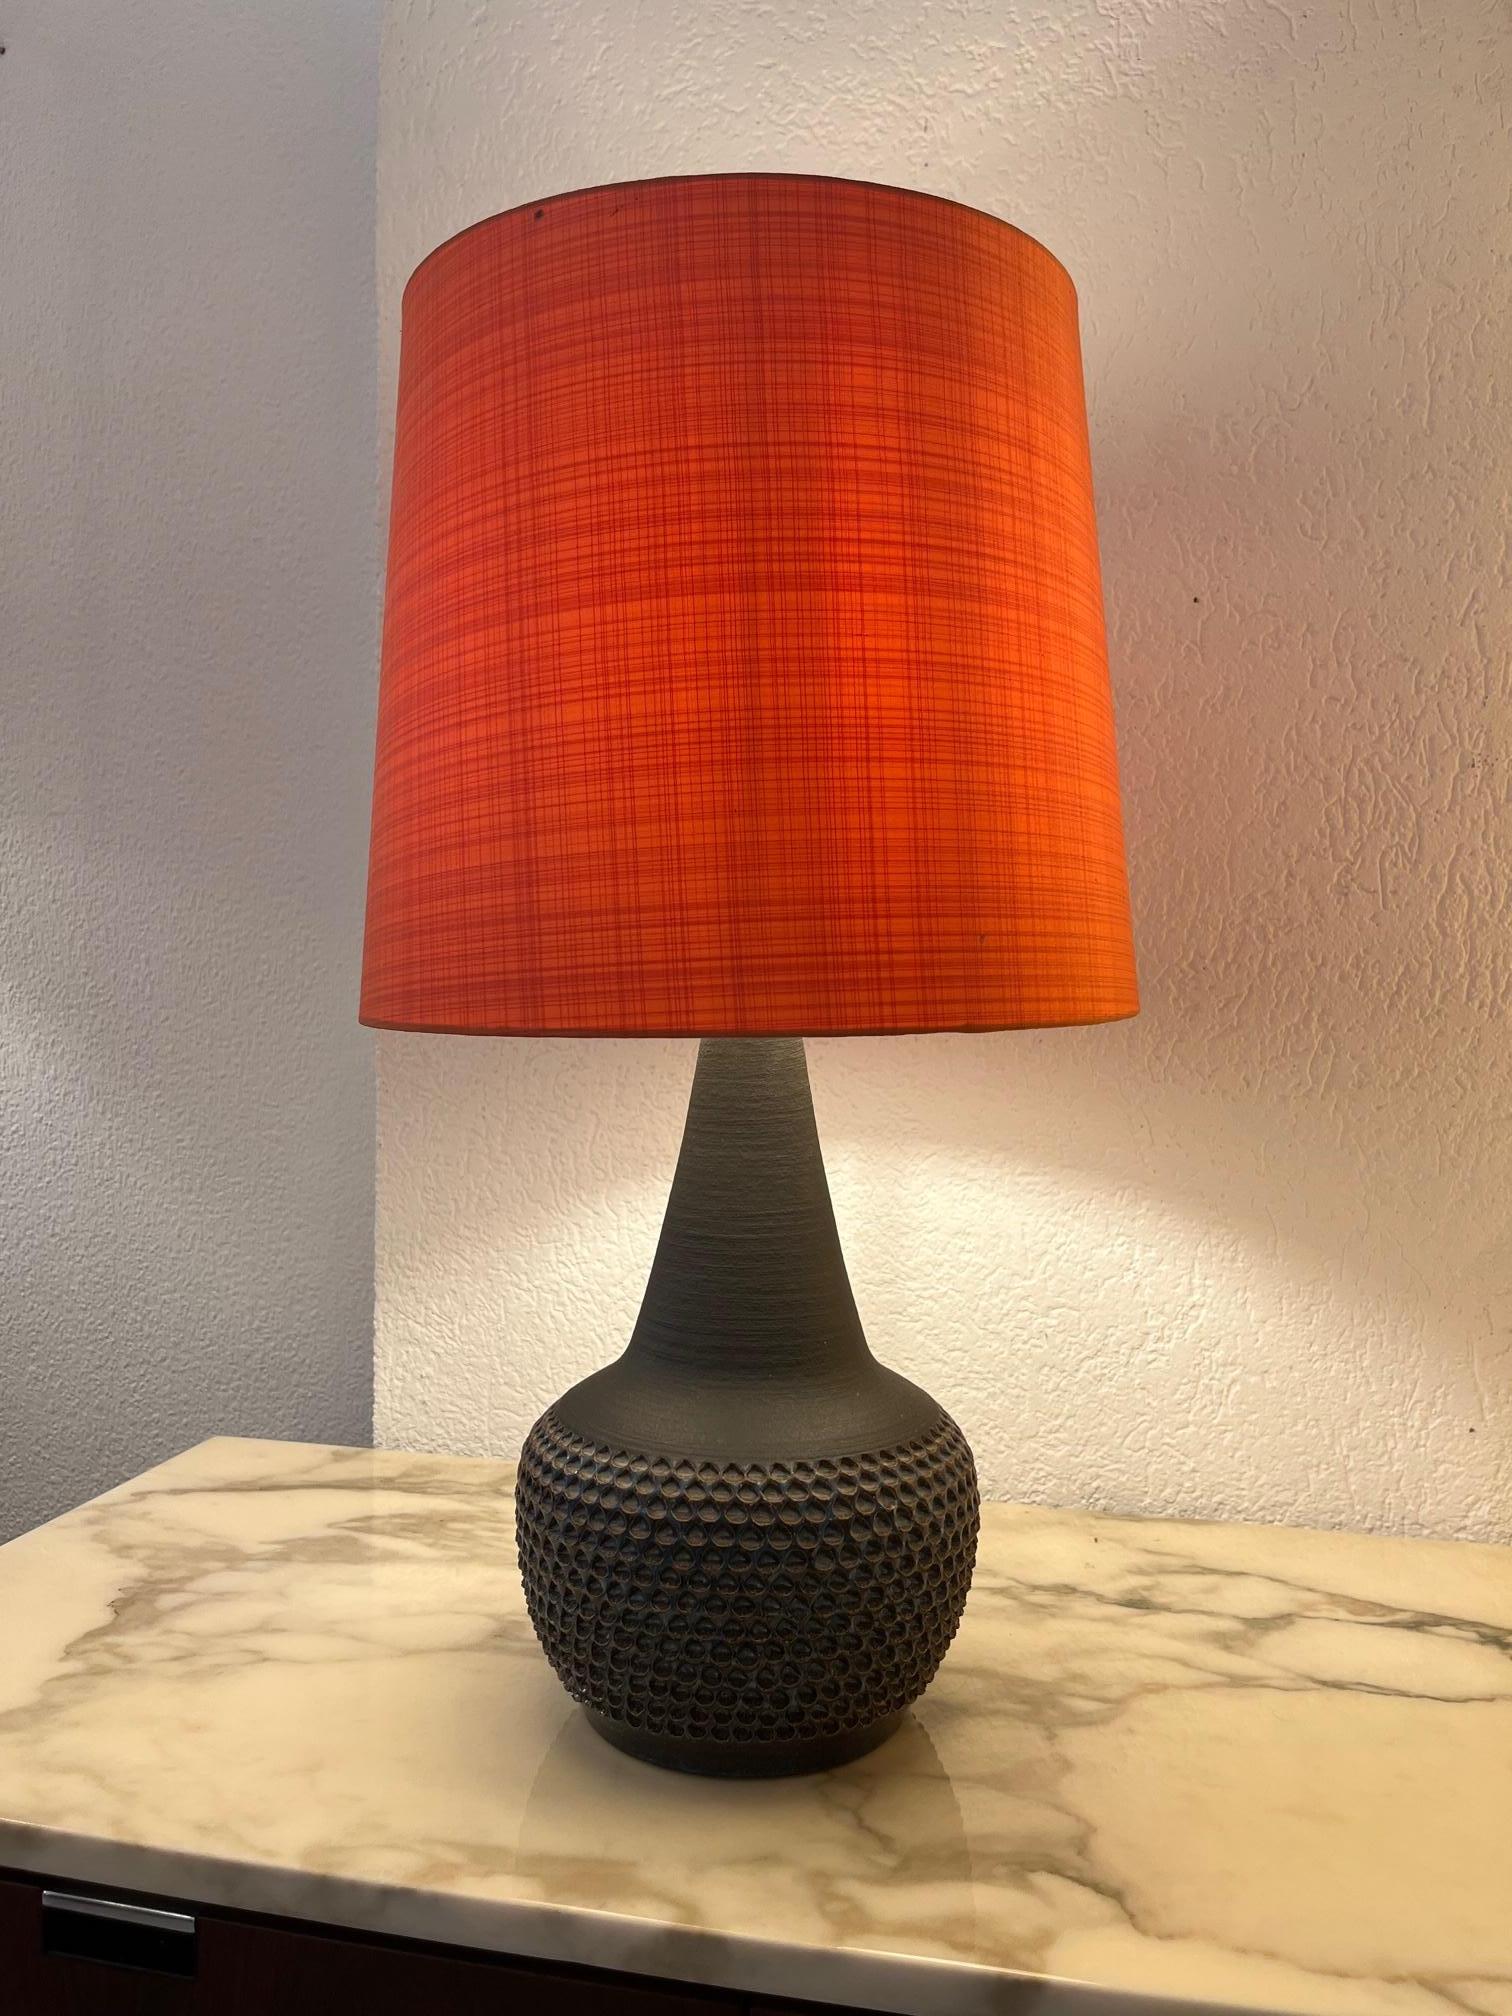 Signed stoneware and glazed ceramic table lamp by Einar Johansen produced by Soholm Ceramics, Denmark ca. 1950's.
Very good condition with original fabric shade, fully functional on/off switch, original wire and plug in.
Signed engraved at the